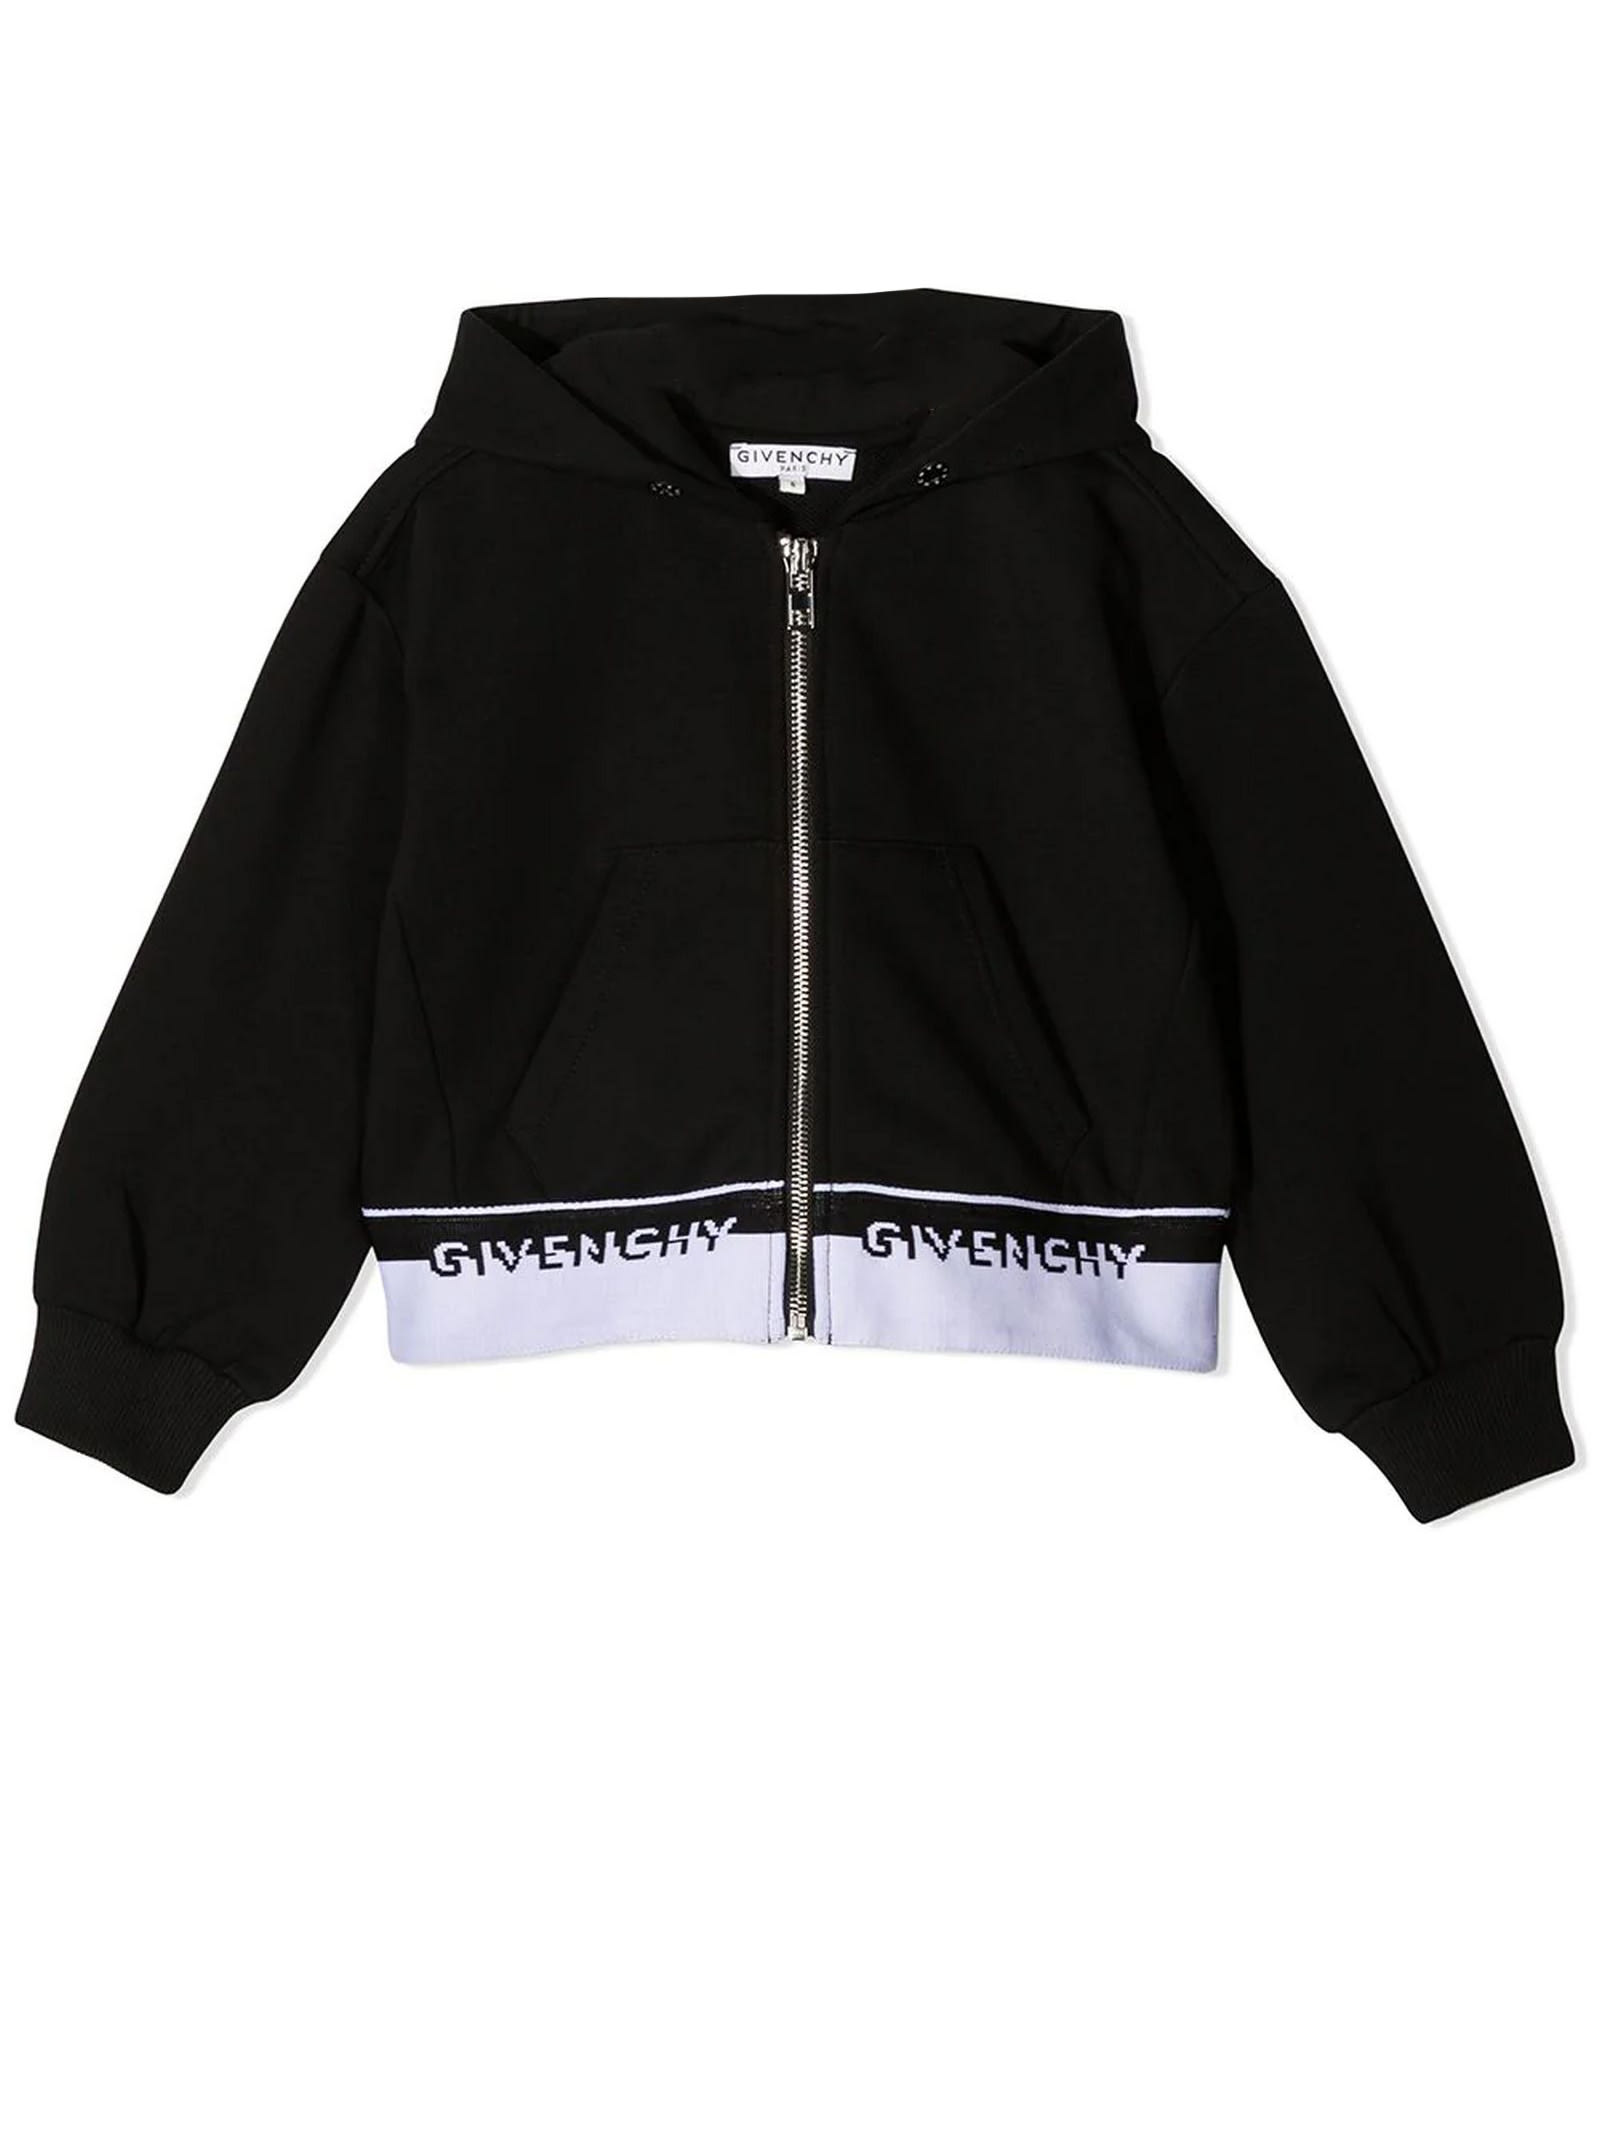 Givenchy Black Cotton-blend Hoodie